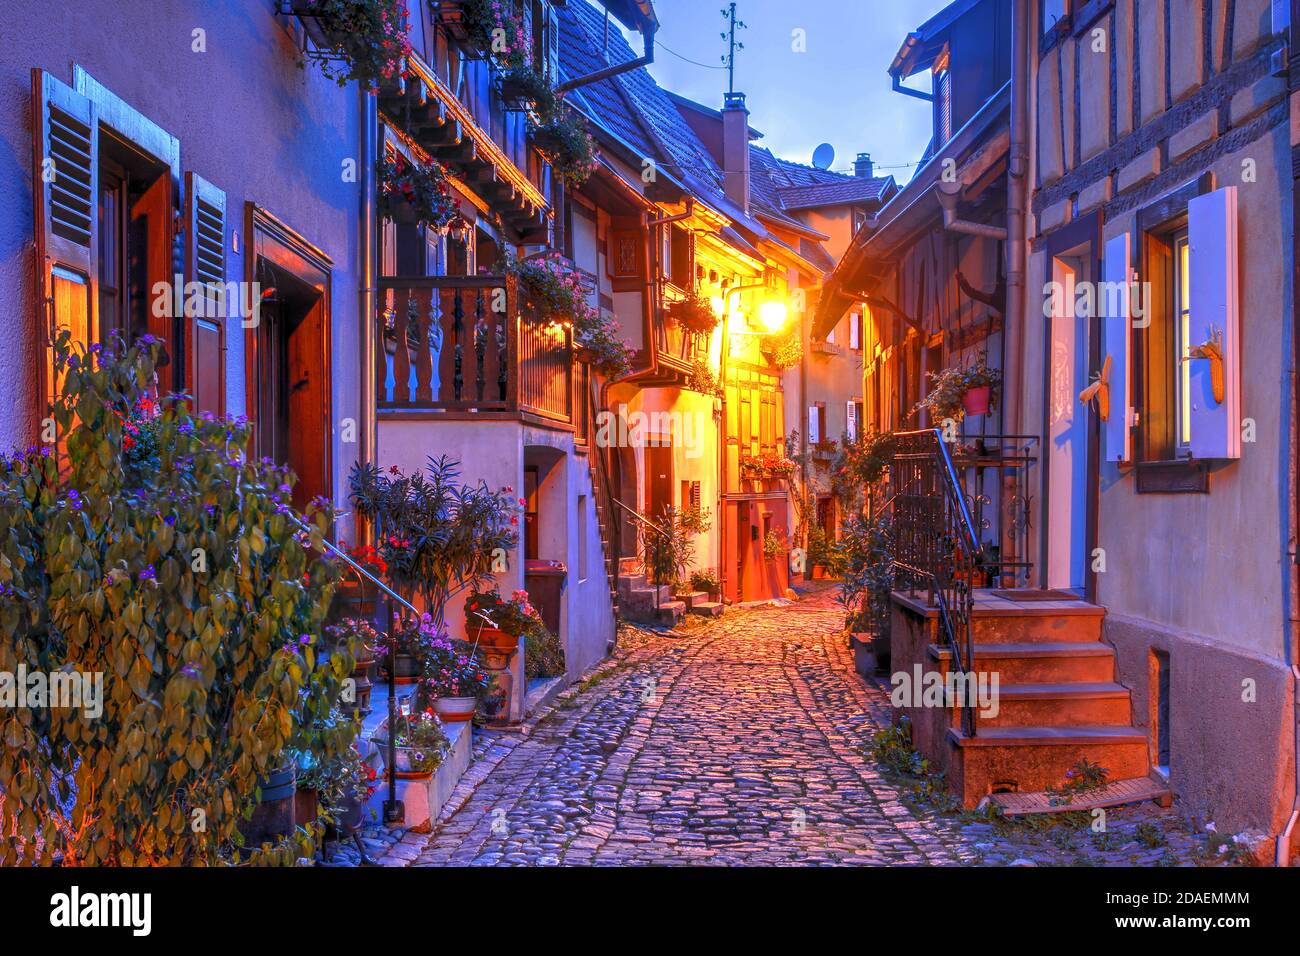 Night scene on the charming streets of Eguisheim, a typical village in the Alsace wine region of France. Stock Photo